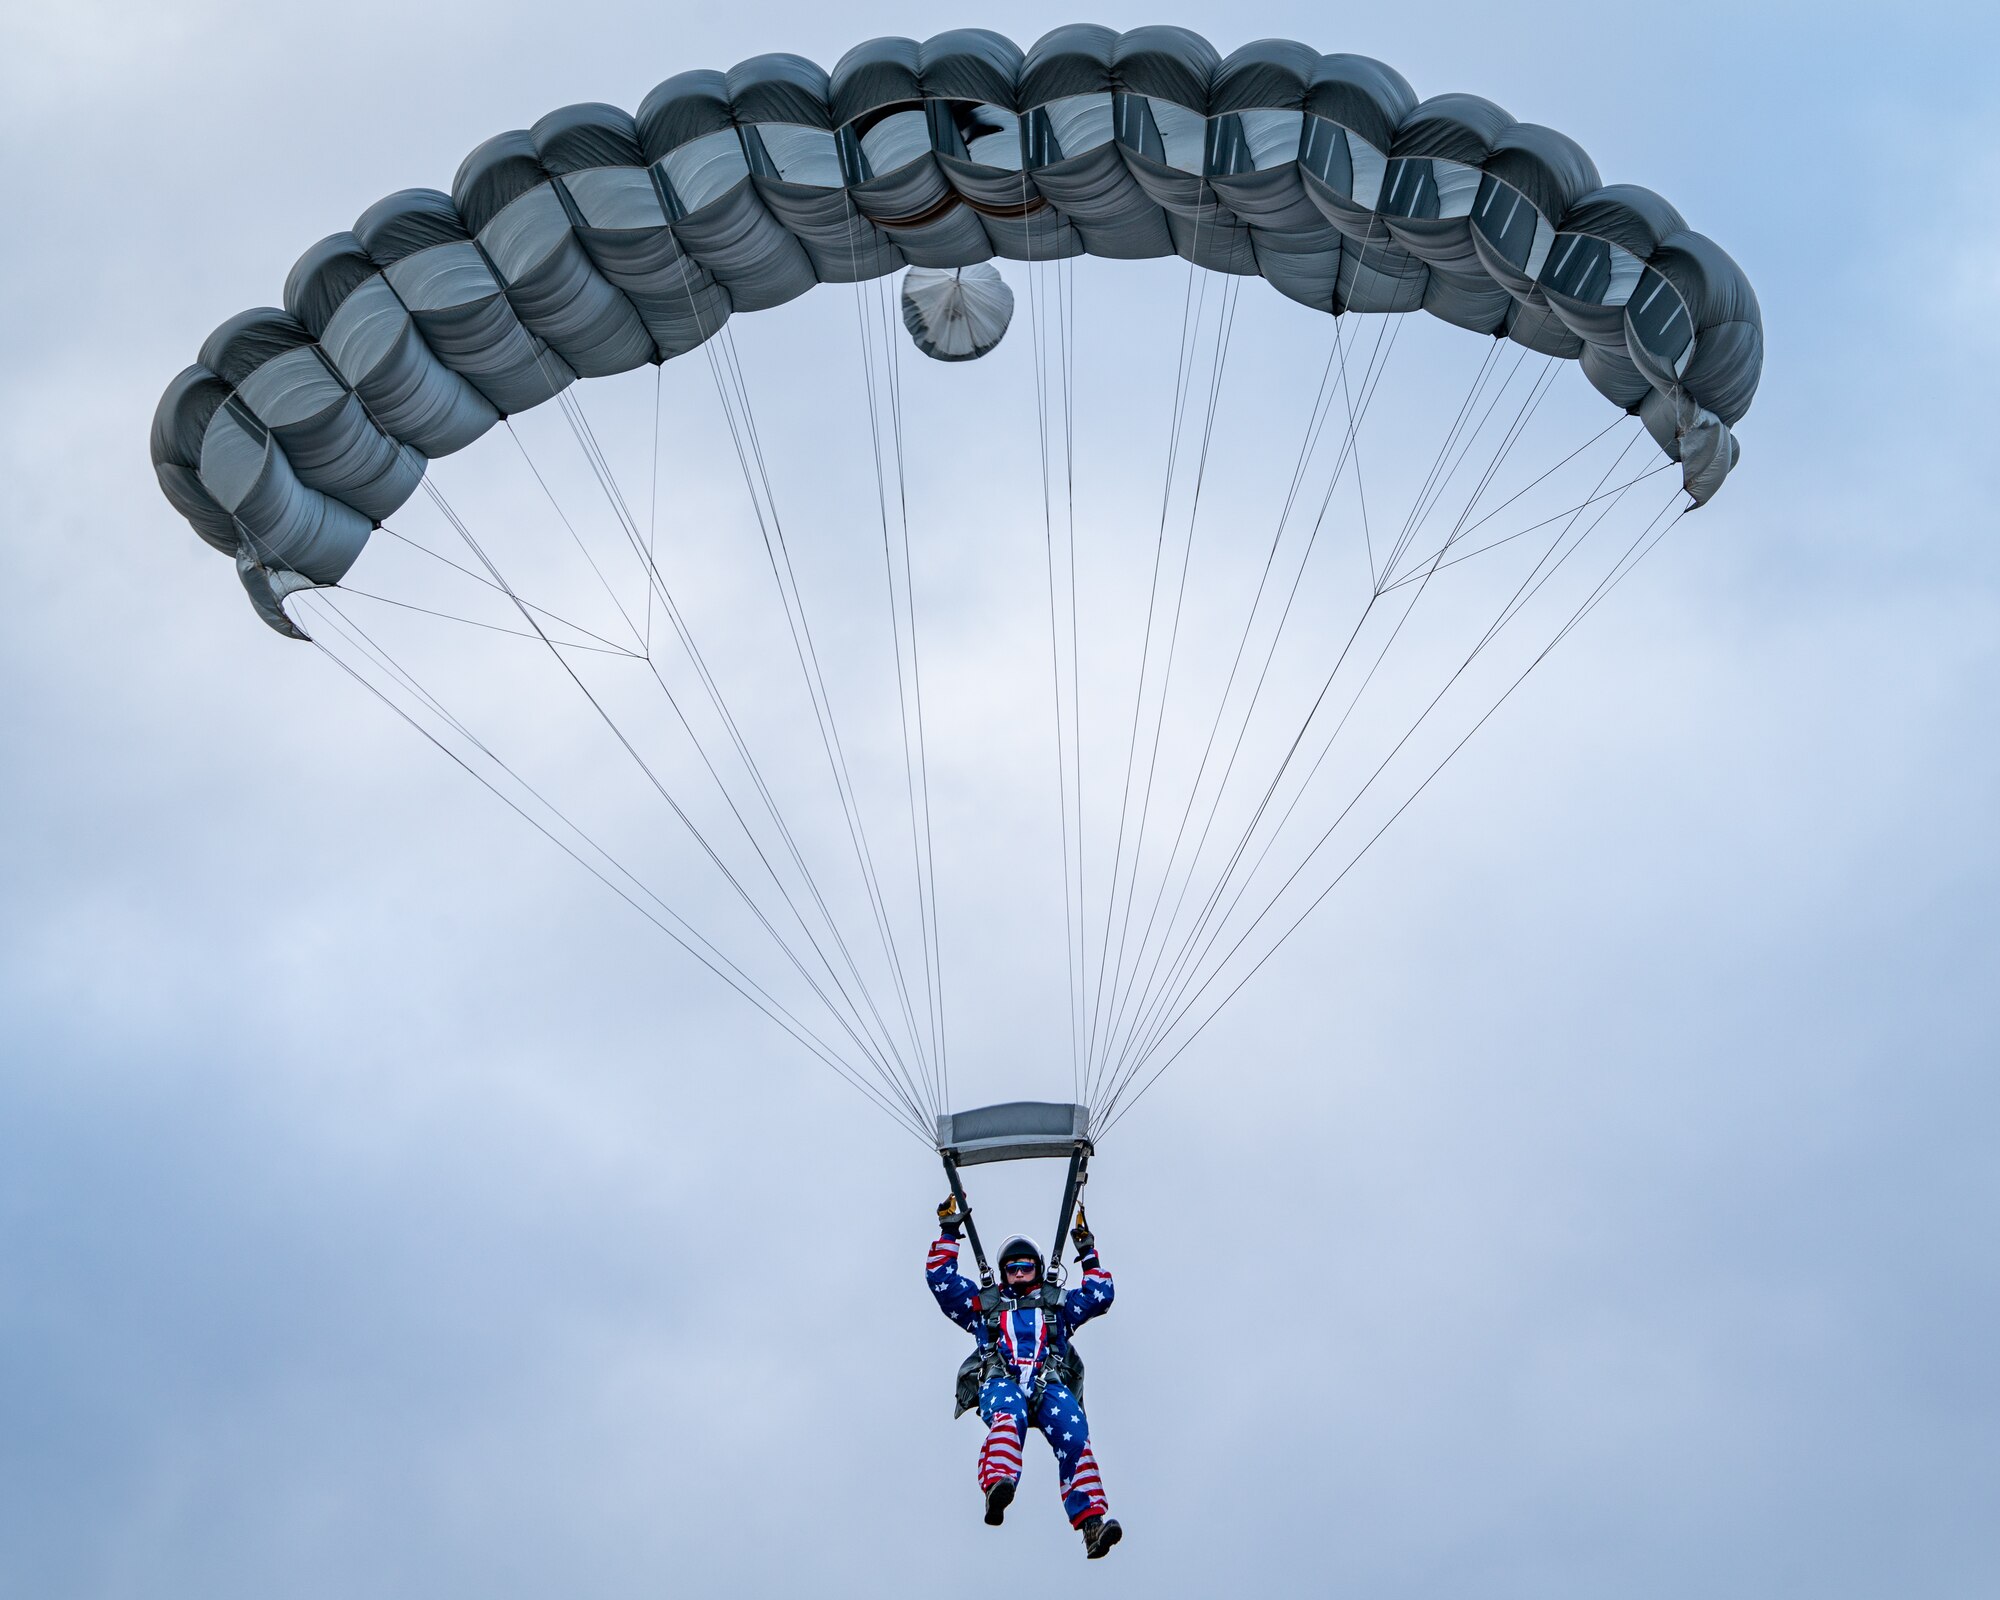 U.S. Air Force Staff Sgt. Daniel Stikeleather, a pararescueman assigned to the 212th Rescue Squadron, Alaska Air National Guard, descends upon Malemute Drop Zone during a training event at Joint Base Elmendorf-Richardson.